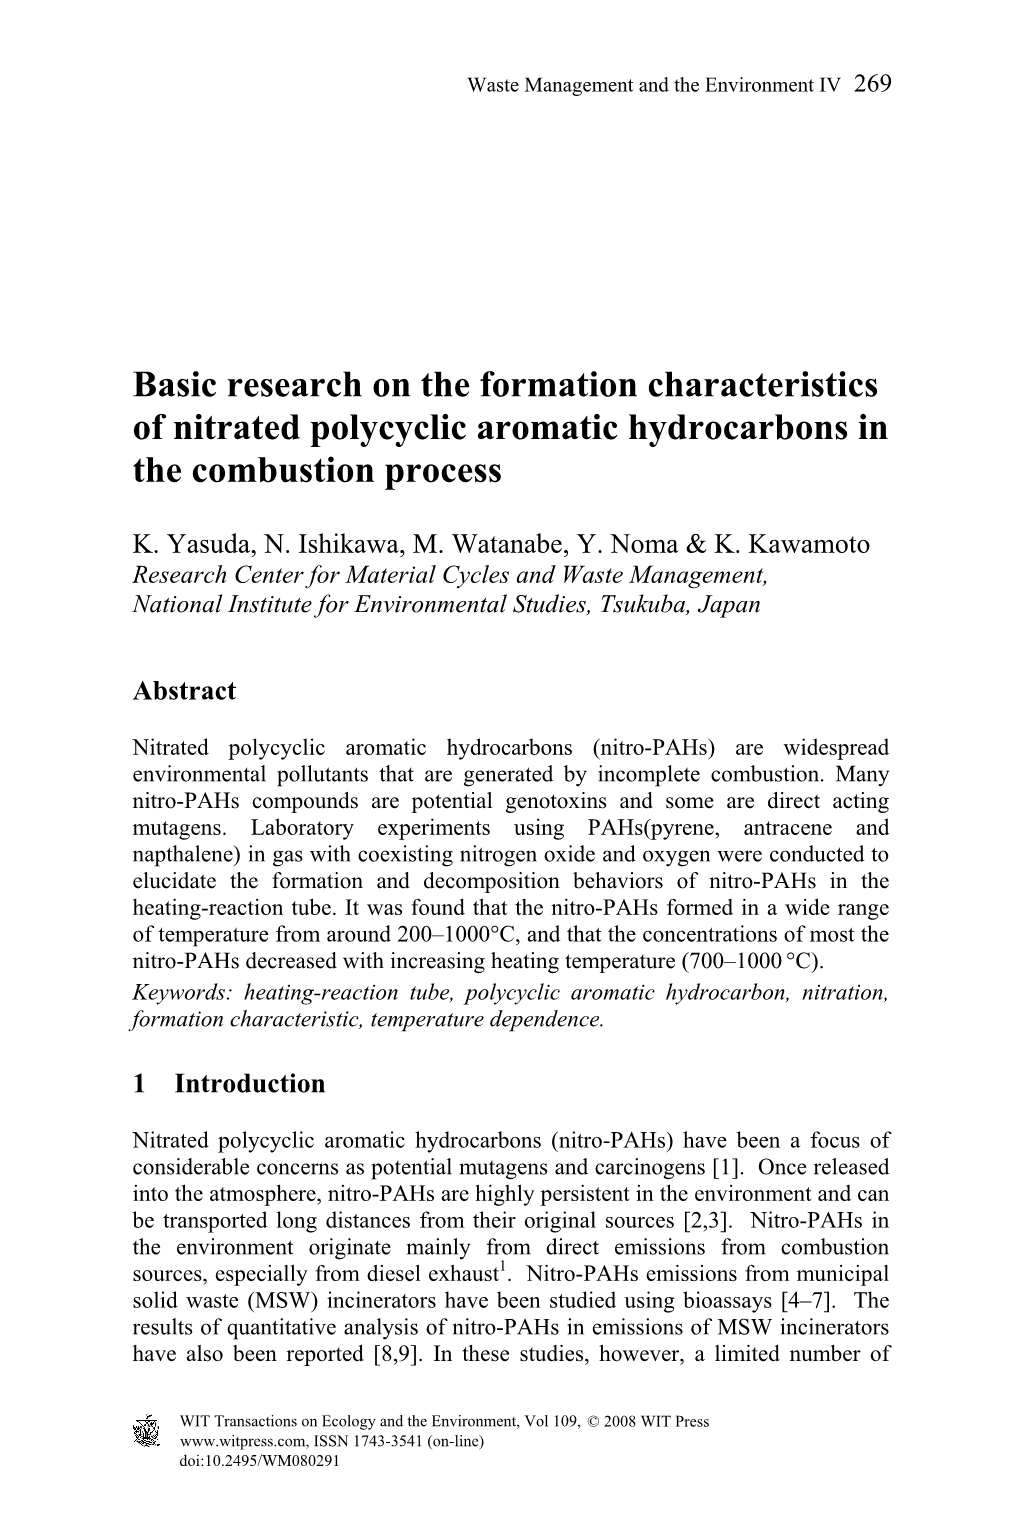 Basic Research on the Formation Characteristics of Nitrated Polycyclic Aromatic Hydrocarbons in the Combustion Process